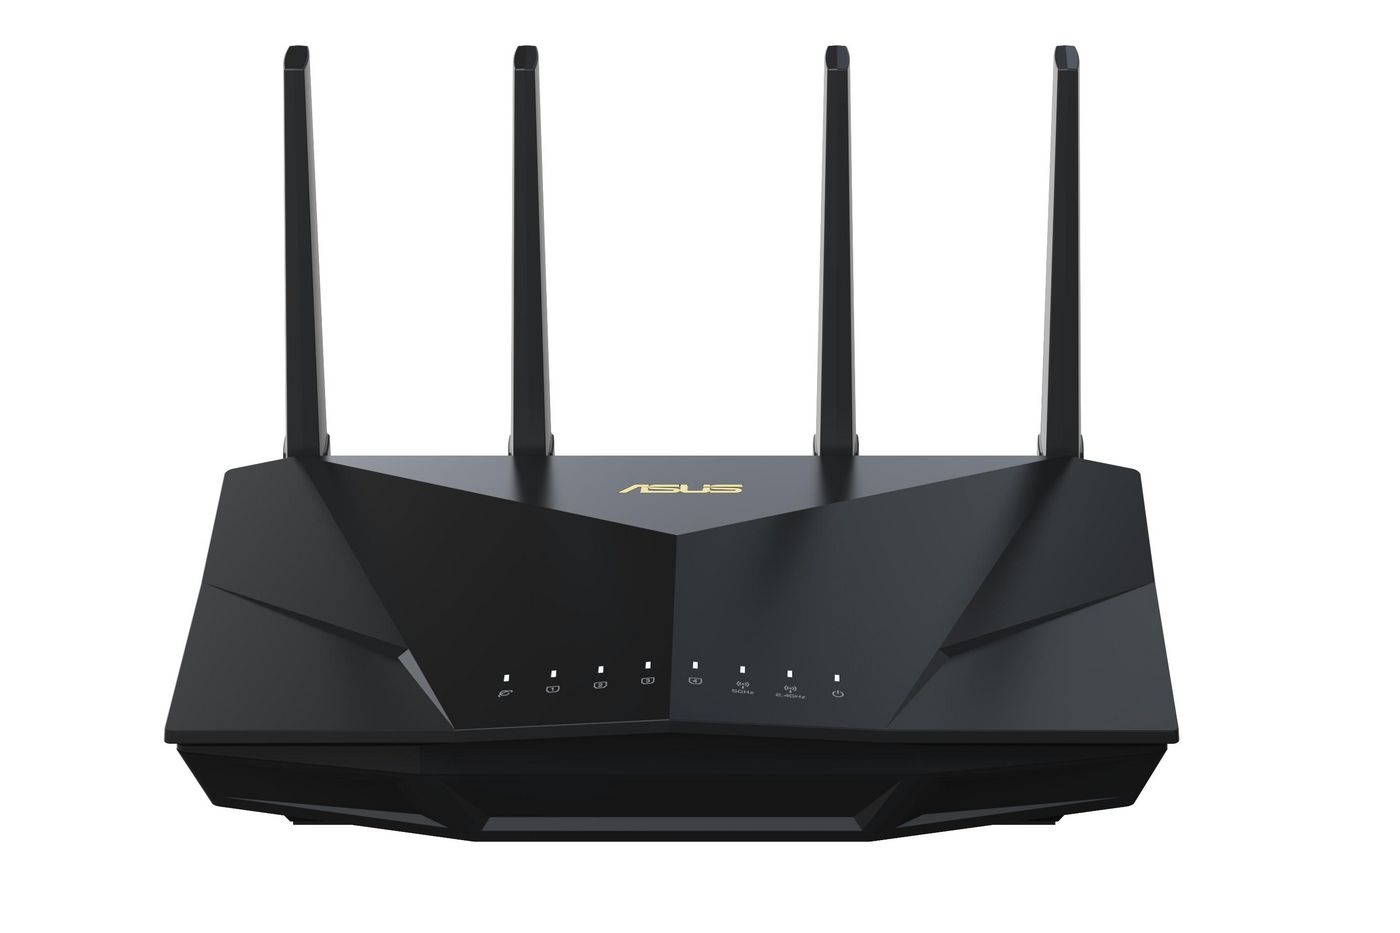 Asus 90IG0860-MO9B00 W128781880 Rt-Ax5400 Wireless Router 